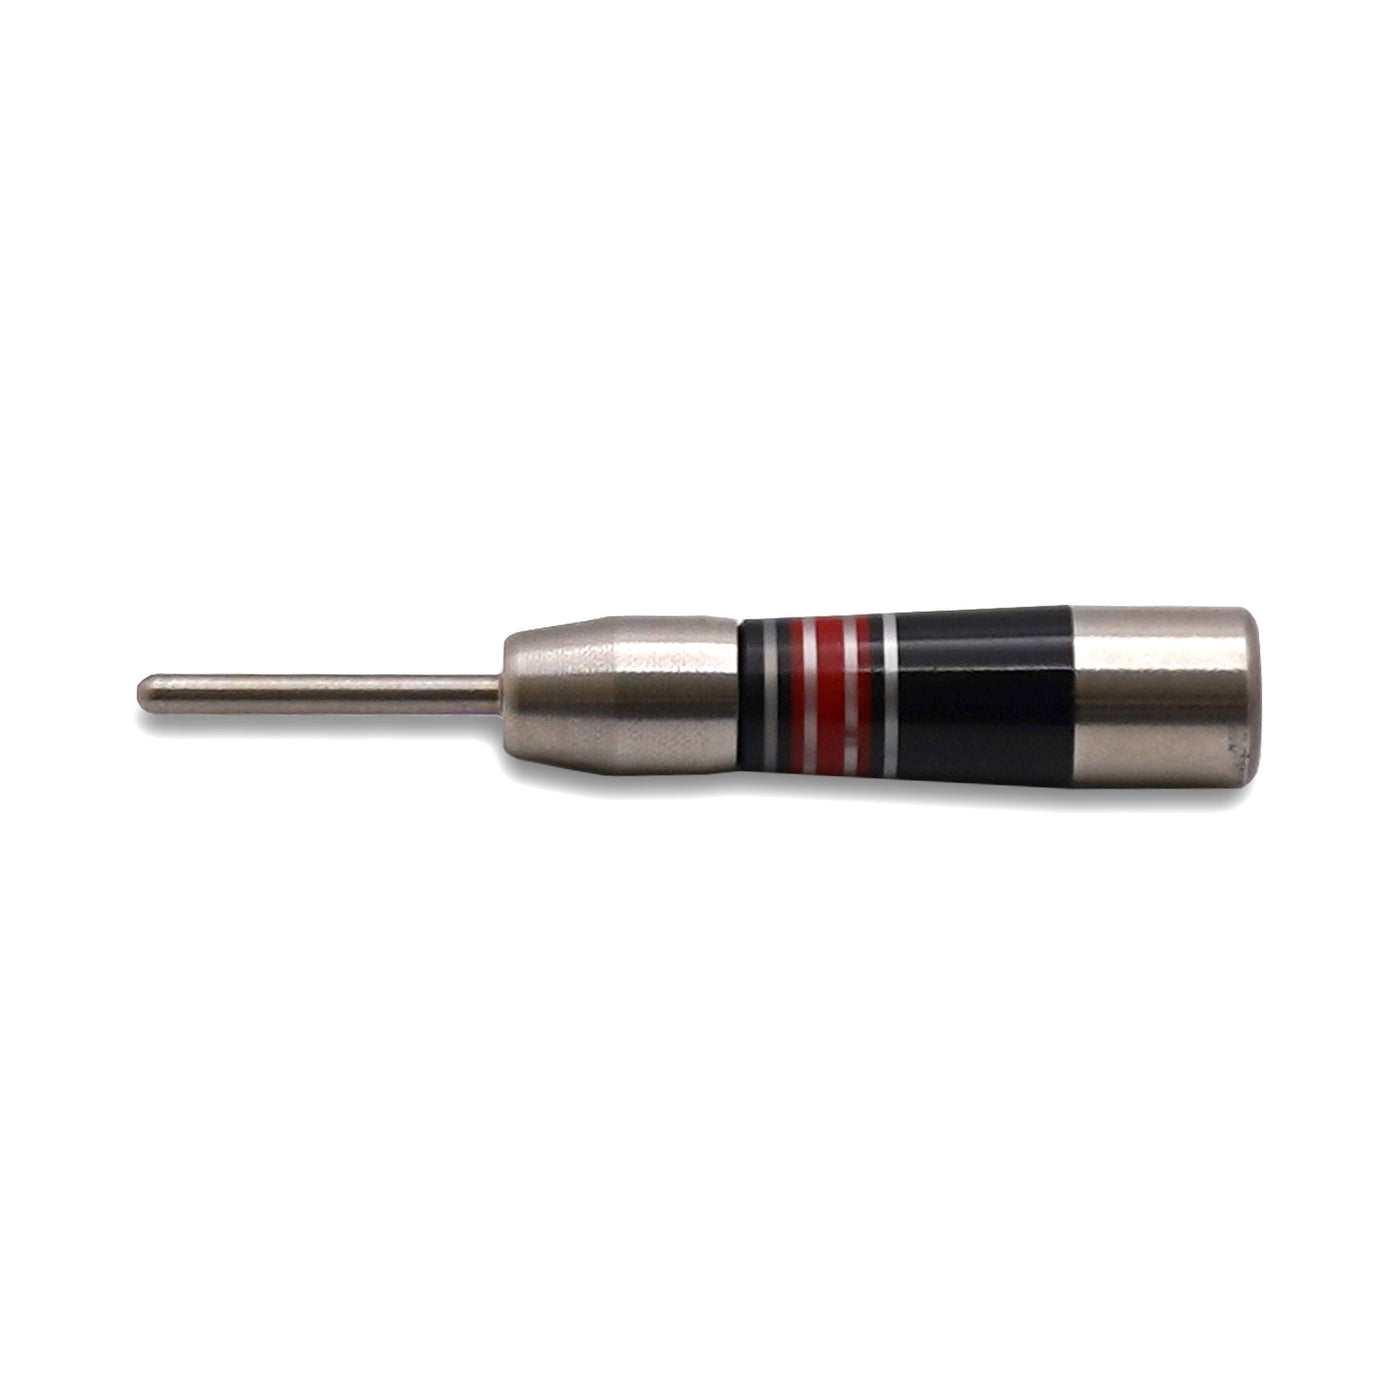 Edel Repair Tool featuring a black and red ferrule